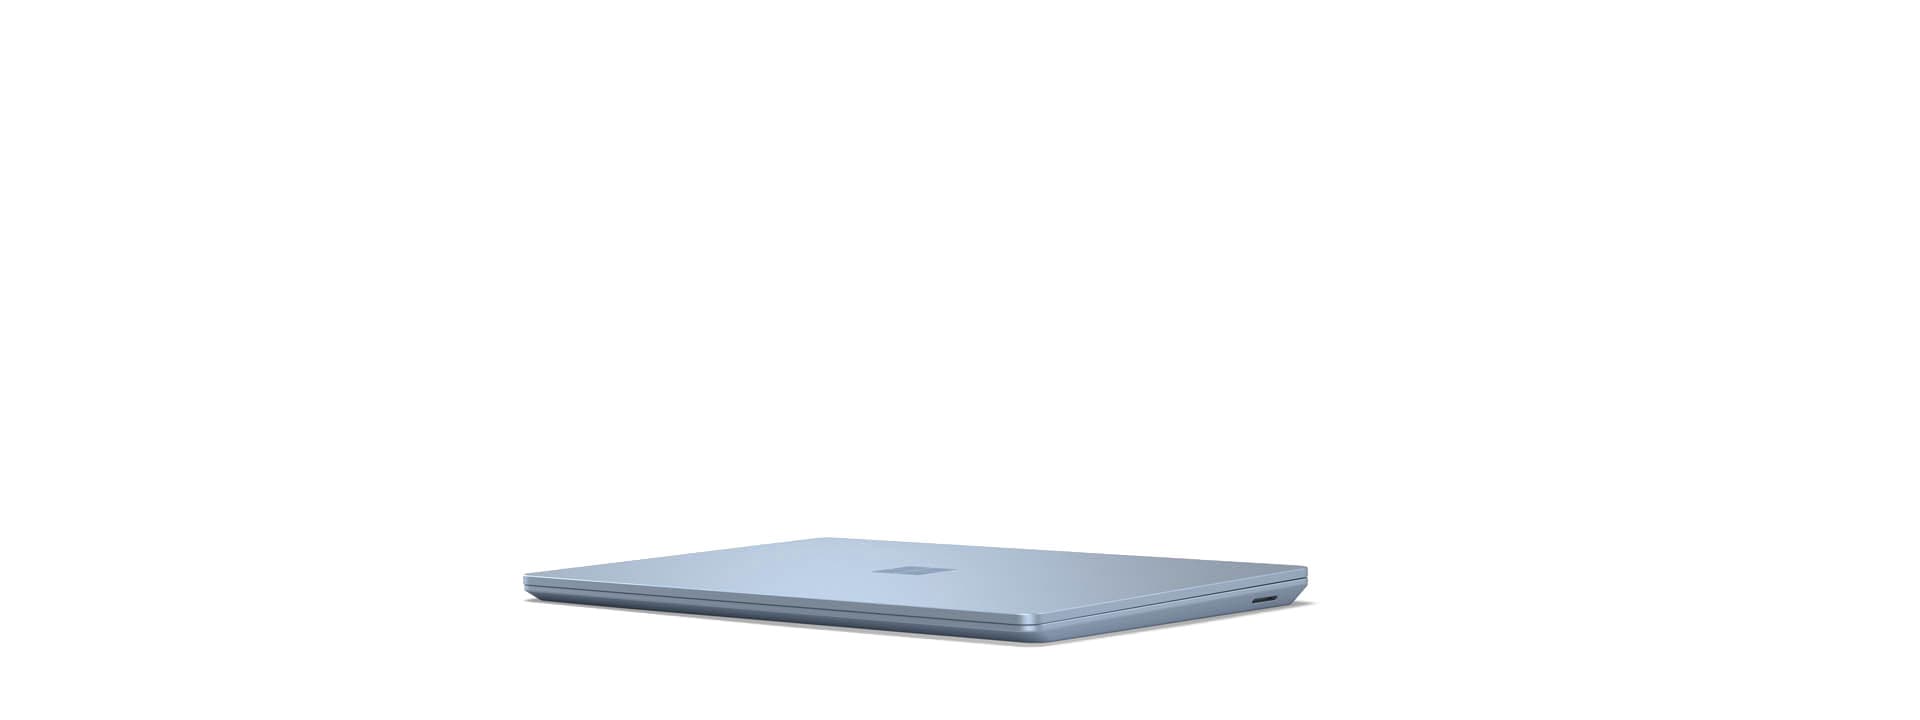 A Surface Laptop Go is shown in the closed position.